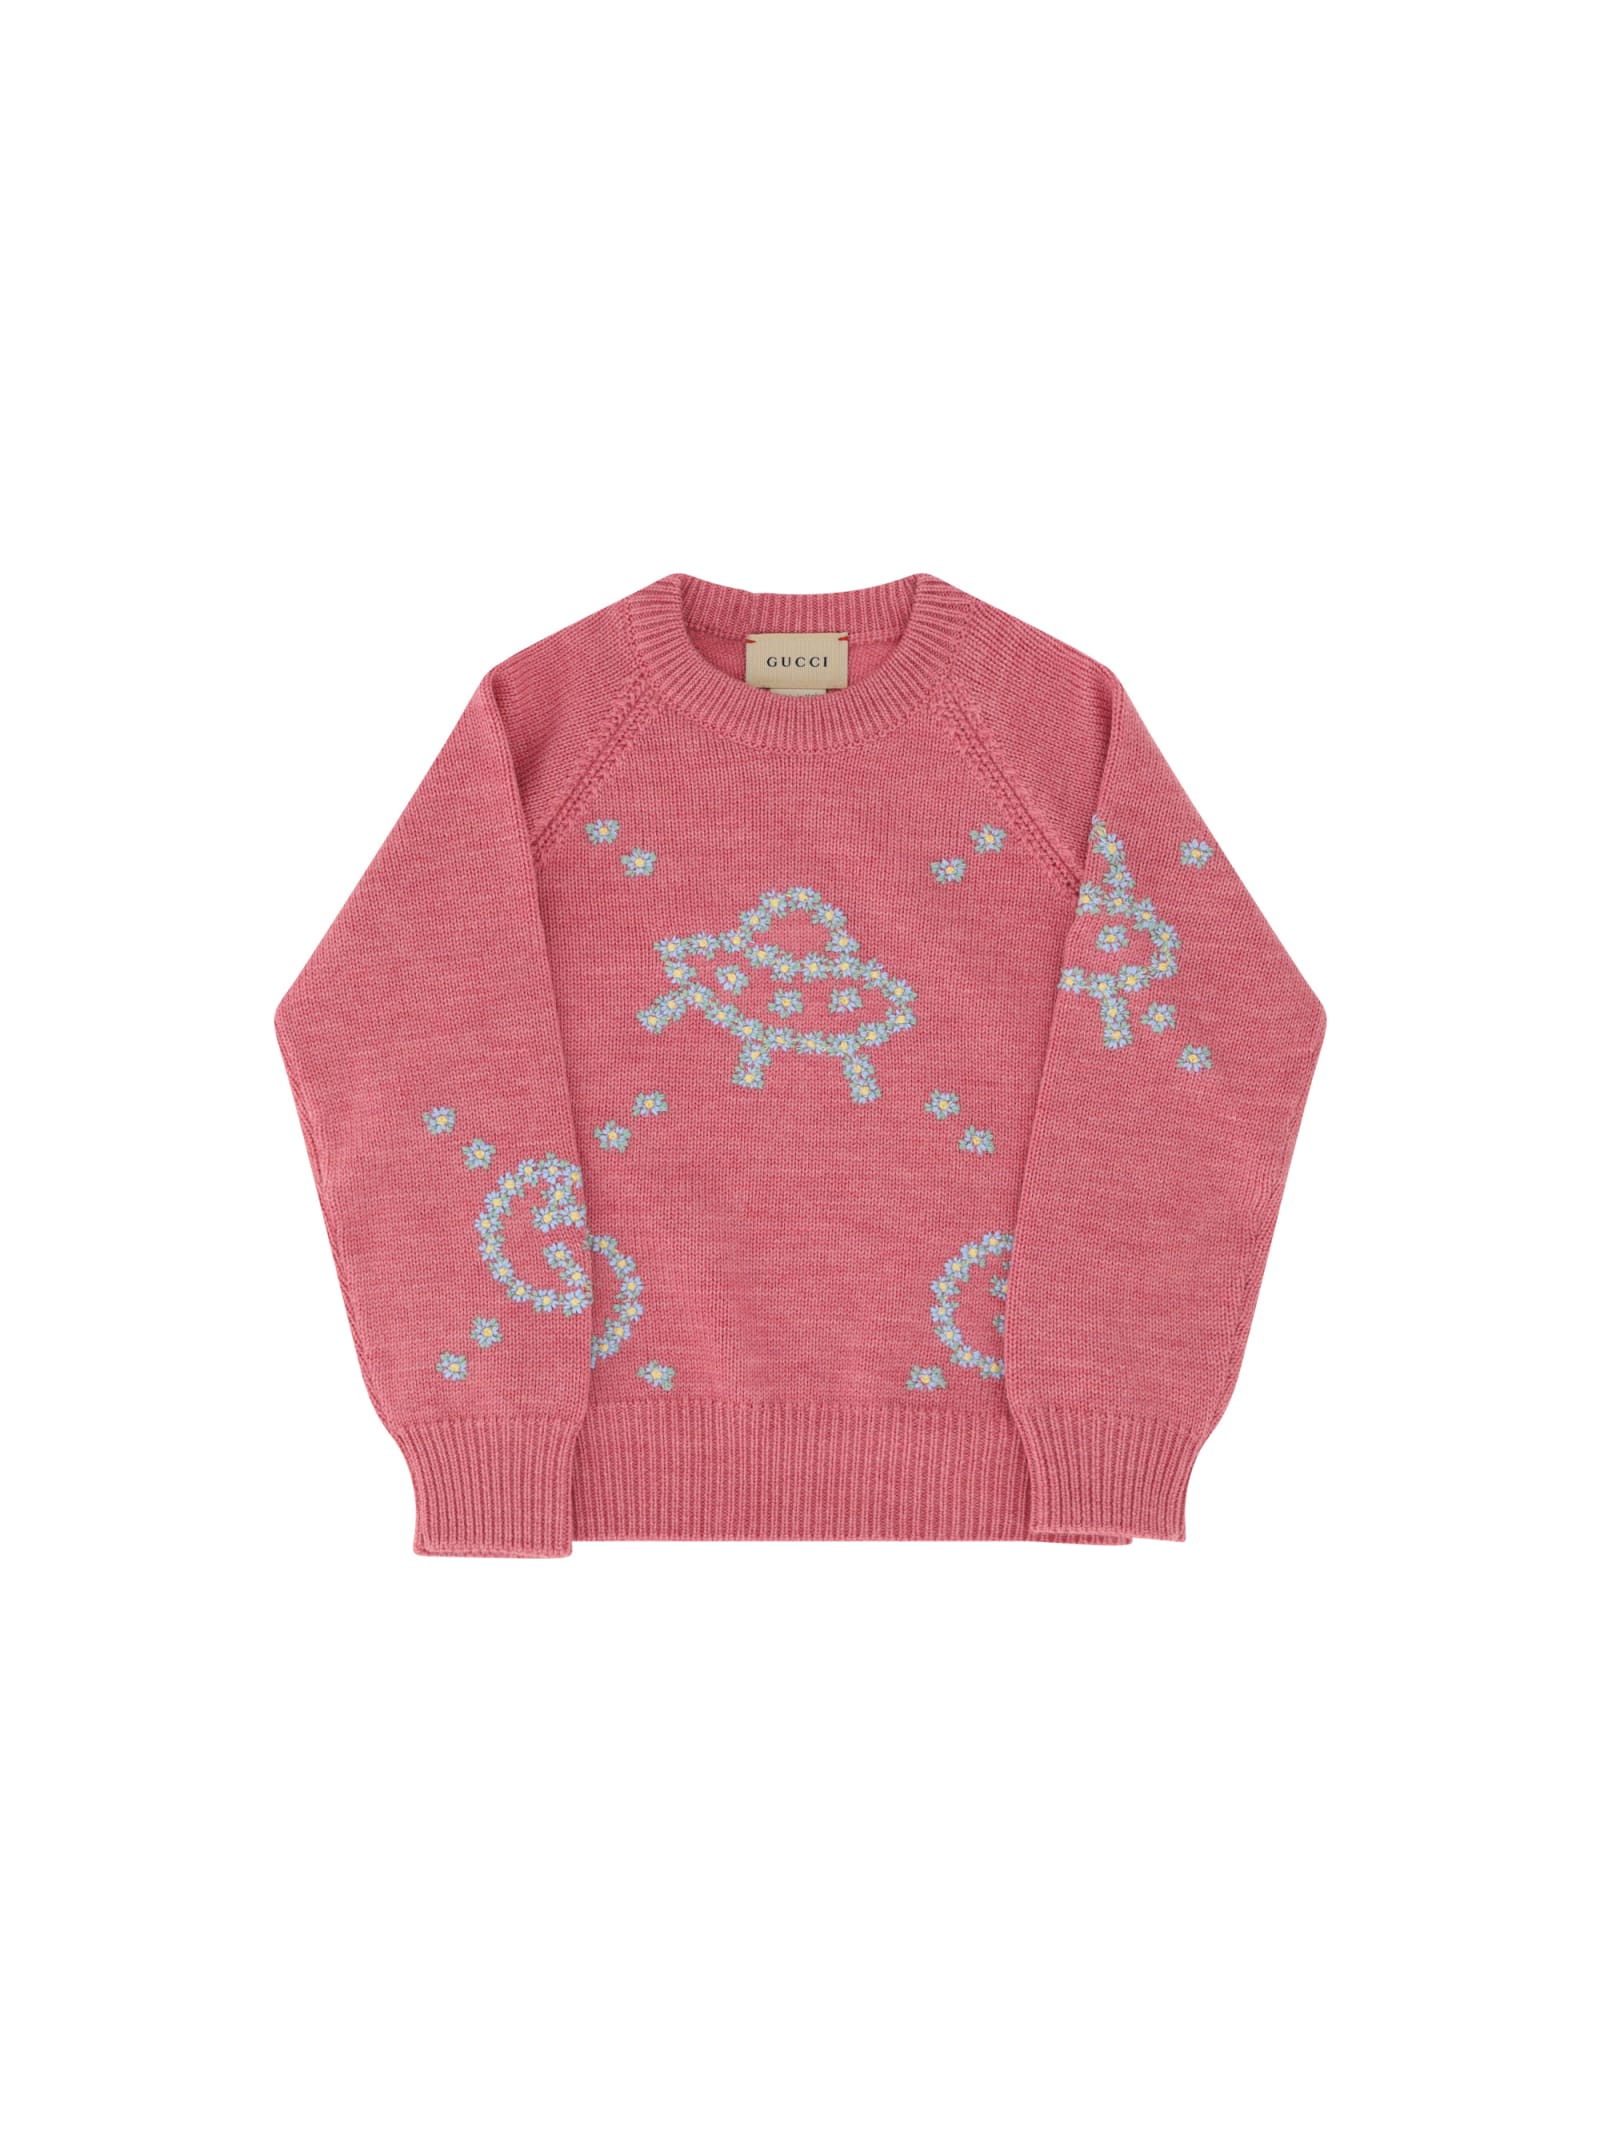 Shop Gucci Sweater For Girl